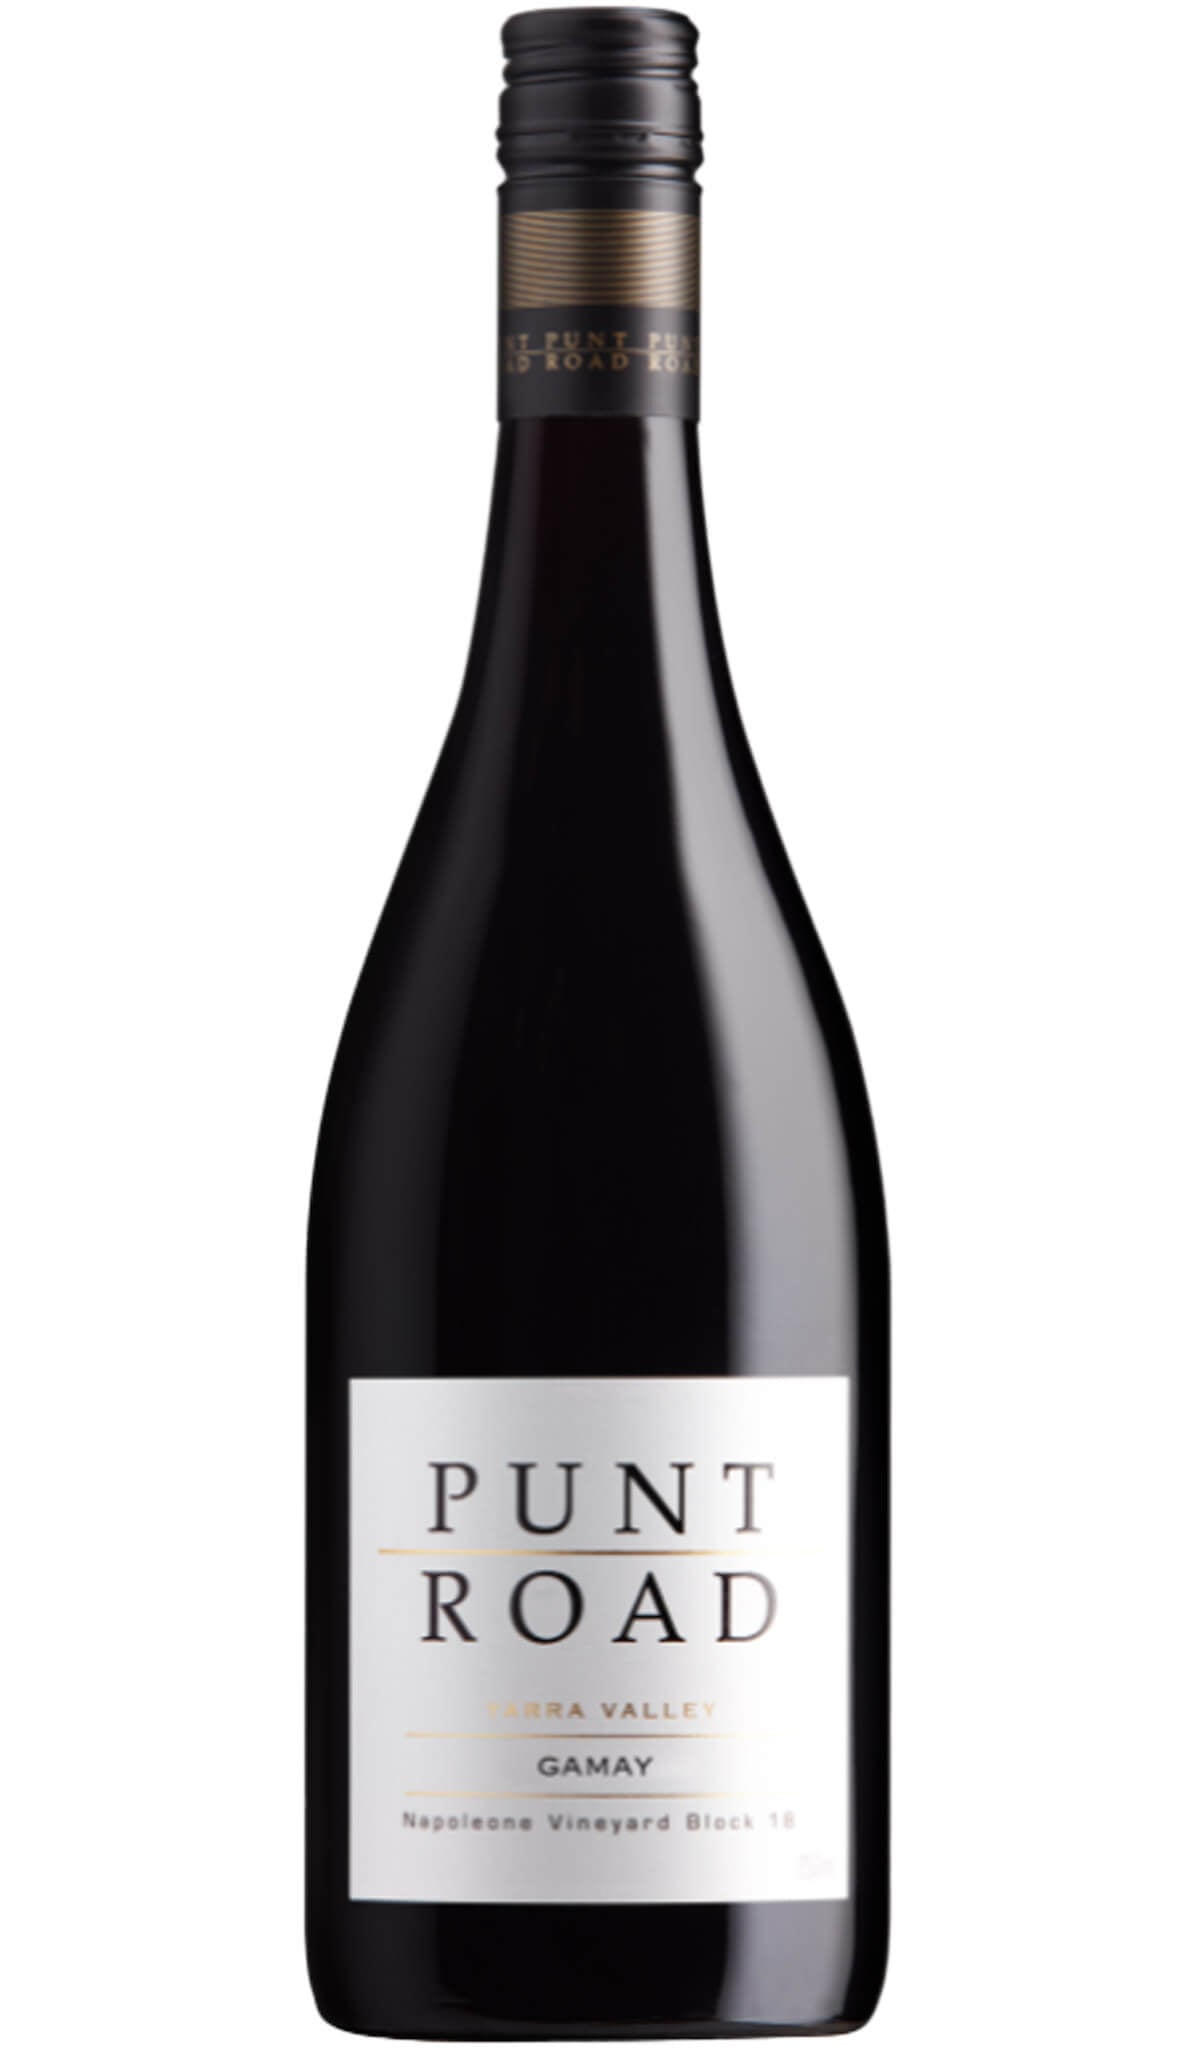 Find out more, explore the range and purchase Punt Road Gamay 2022 (Yarra Valley) available online at Wine Sellers Direct - Australia's independent liquor specialists.